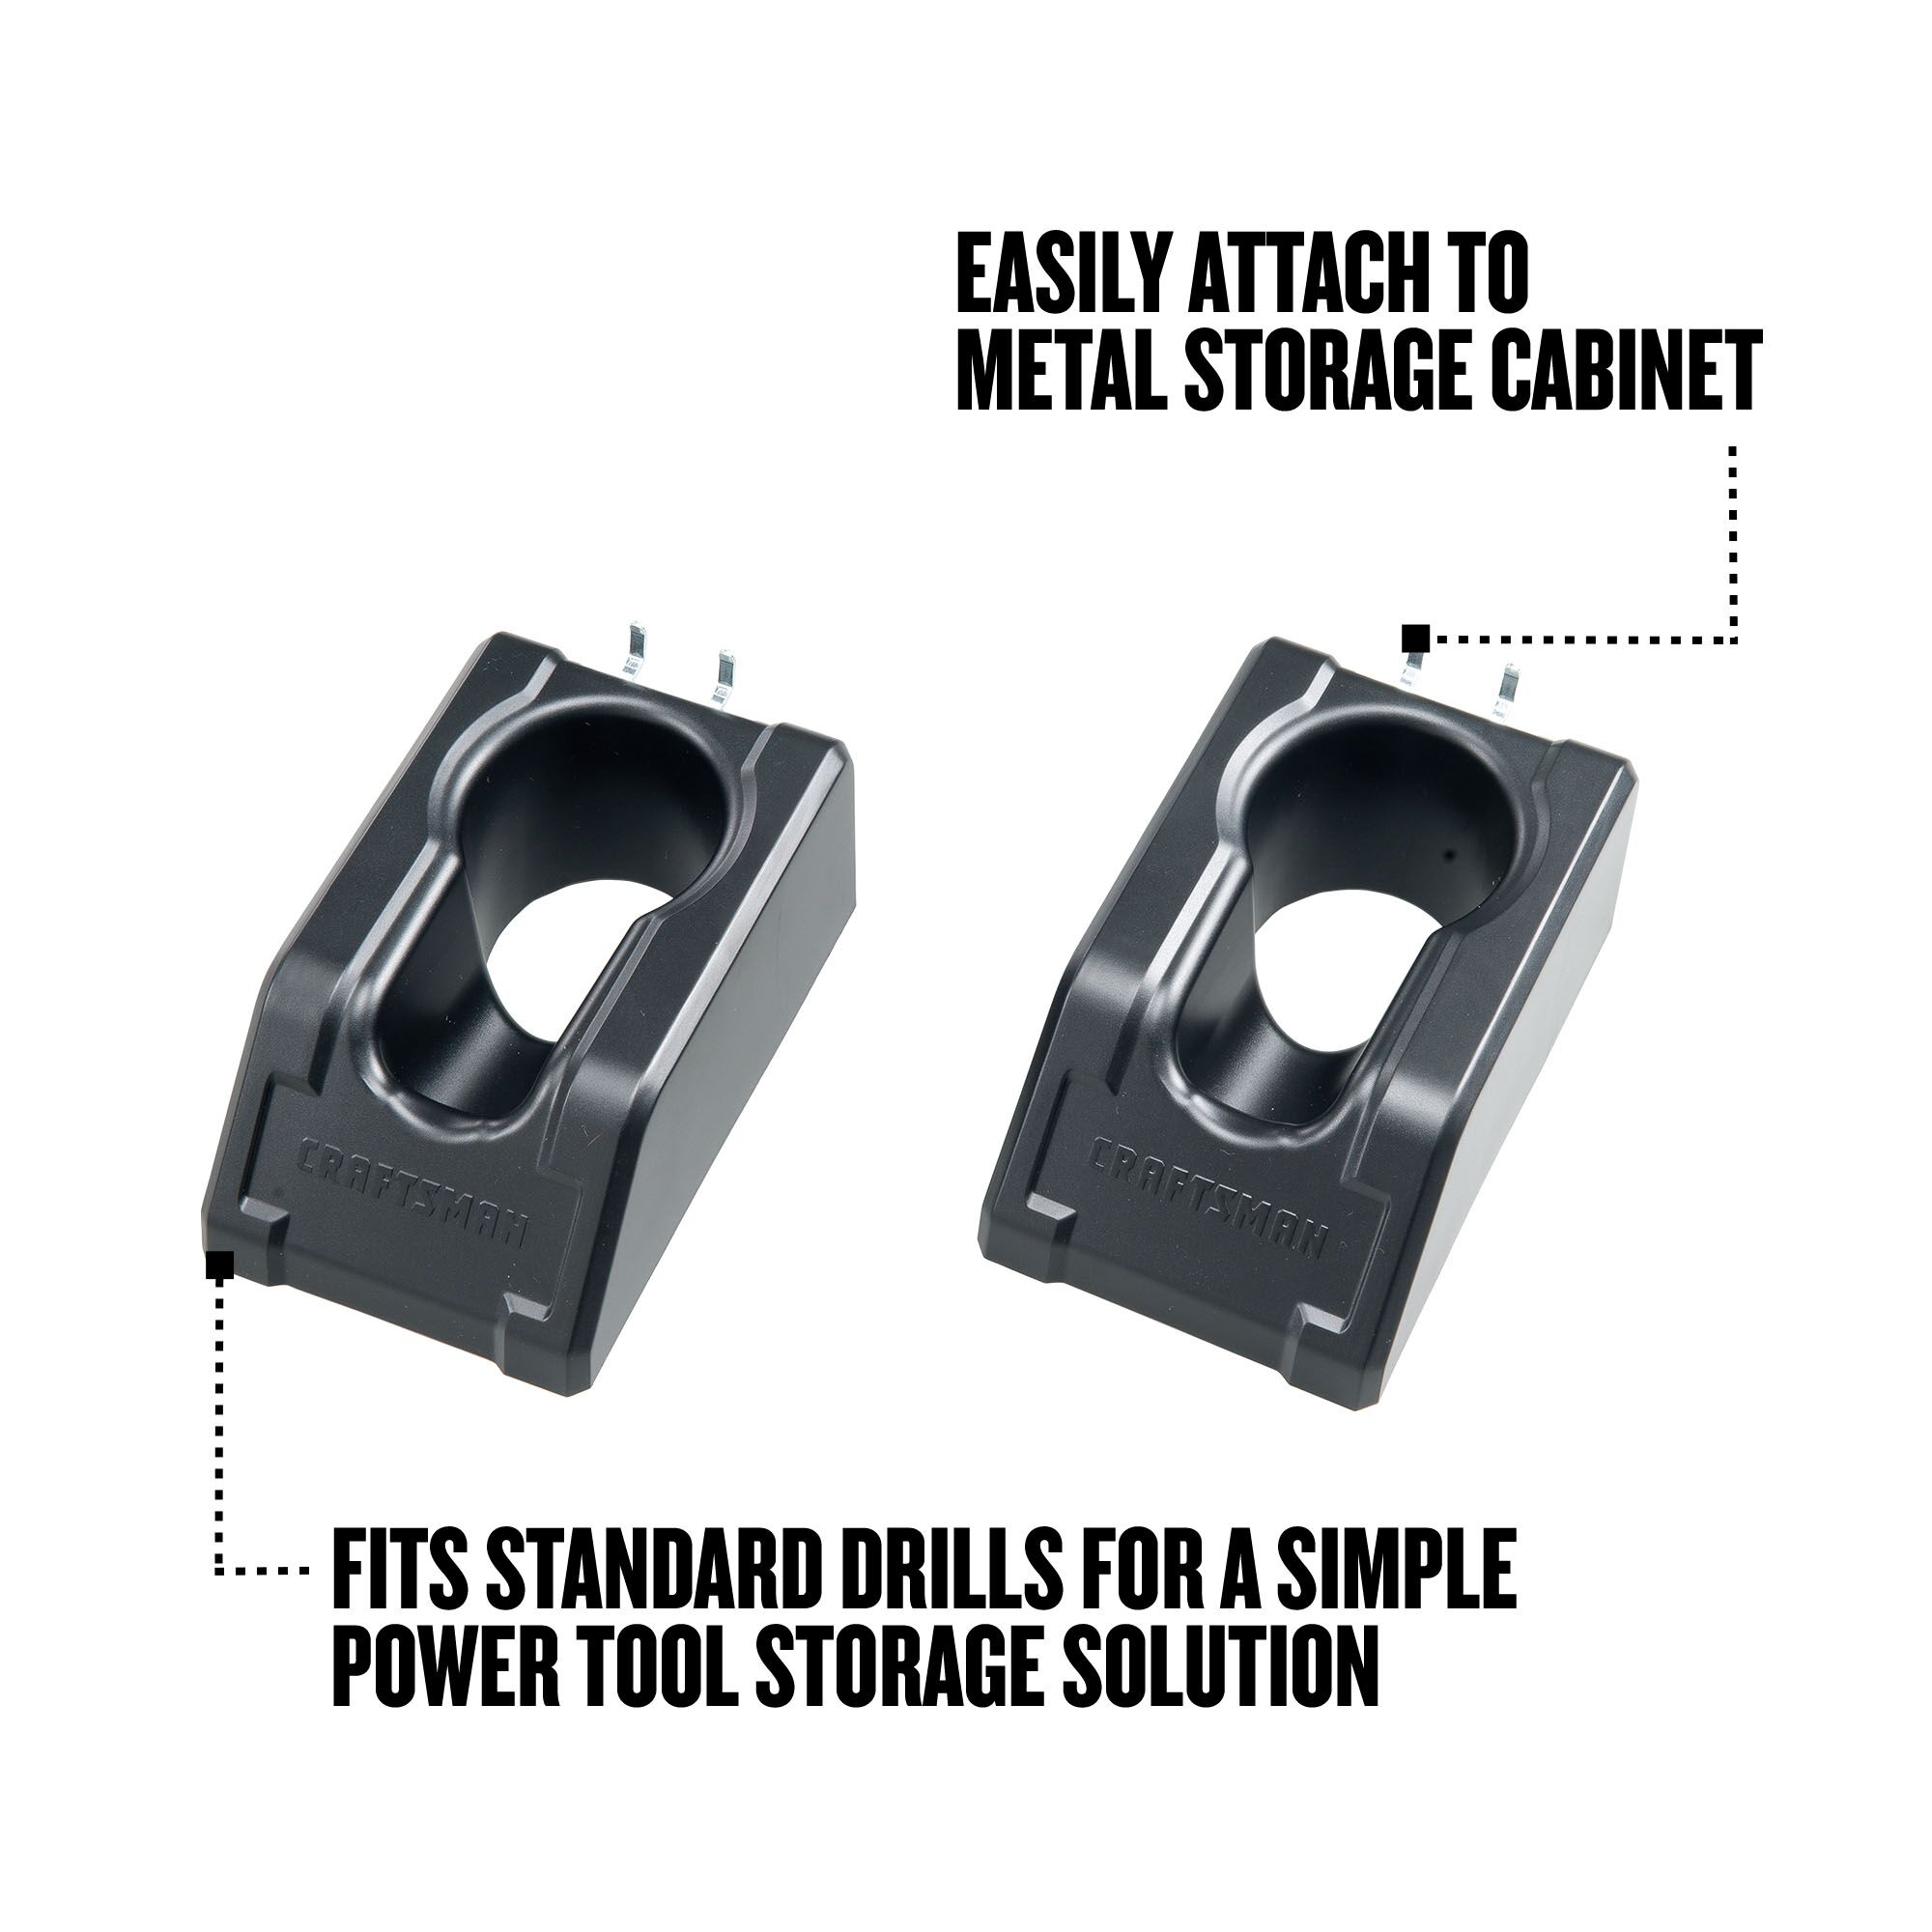 Walk-around graphic of product highlighting they easily attach to metal storage cabinets, fits standard drills